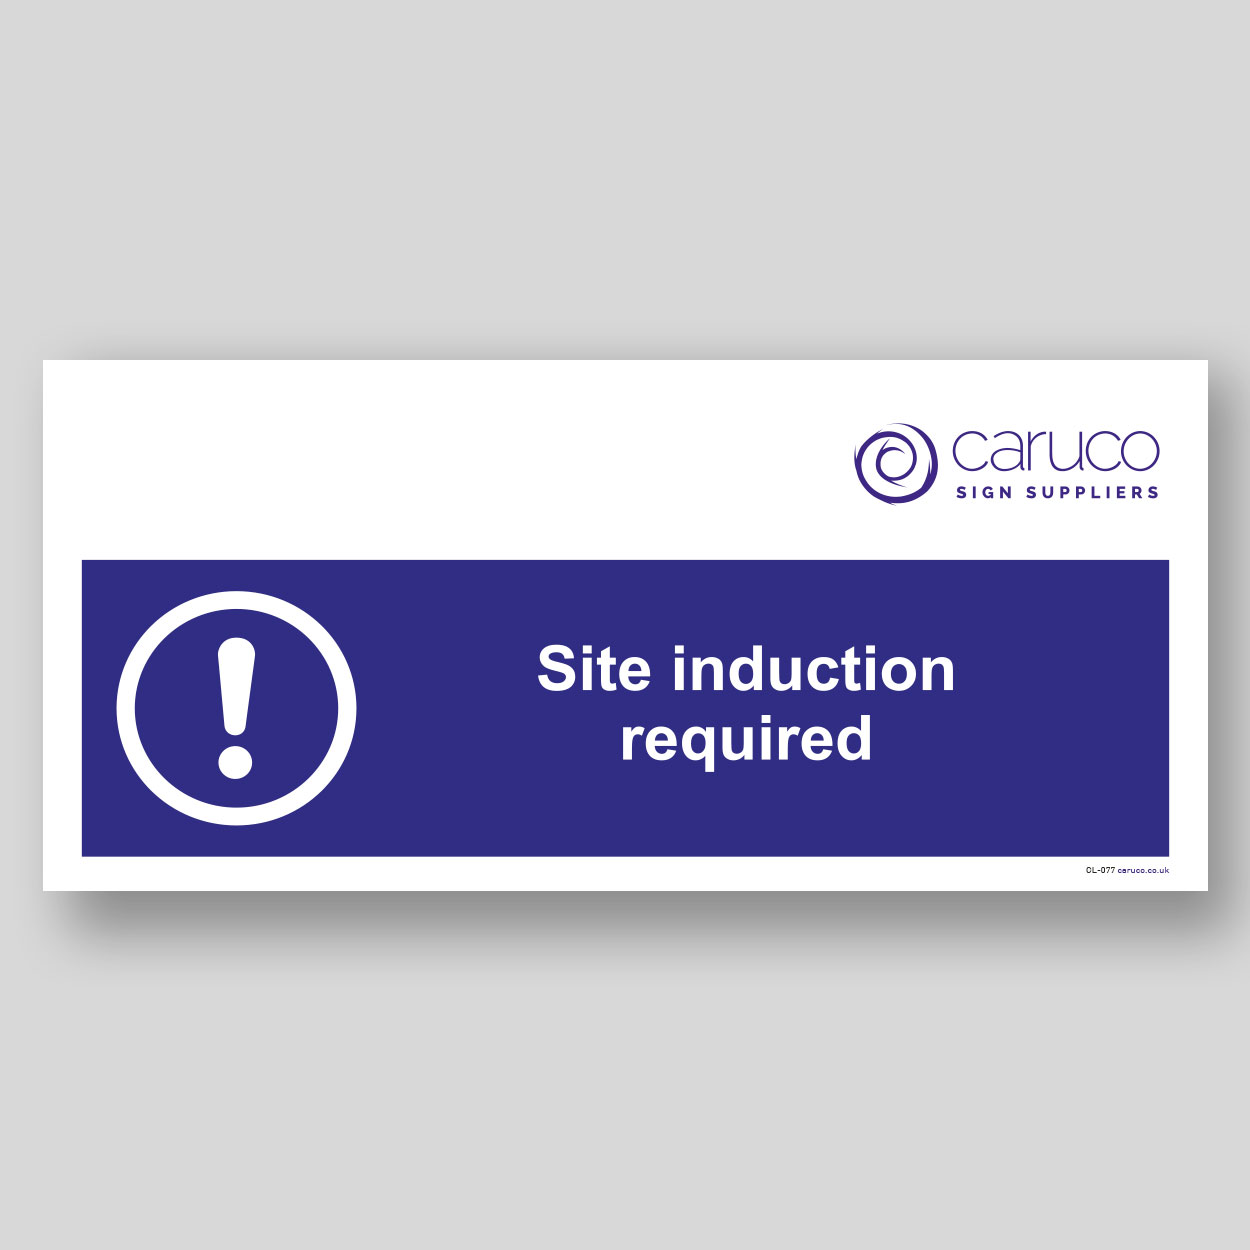 CL-077 Site induction required